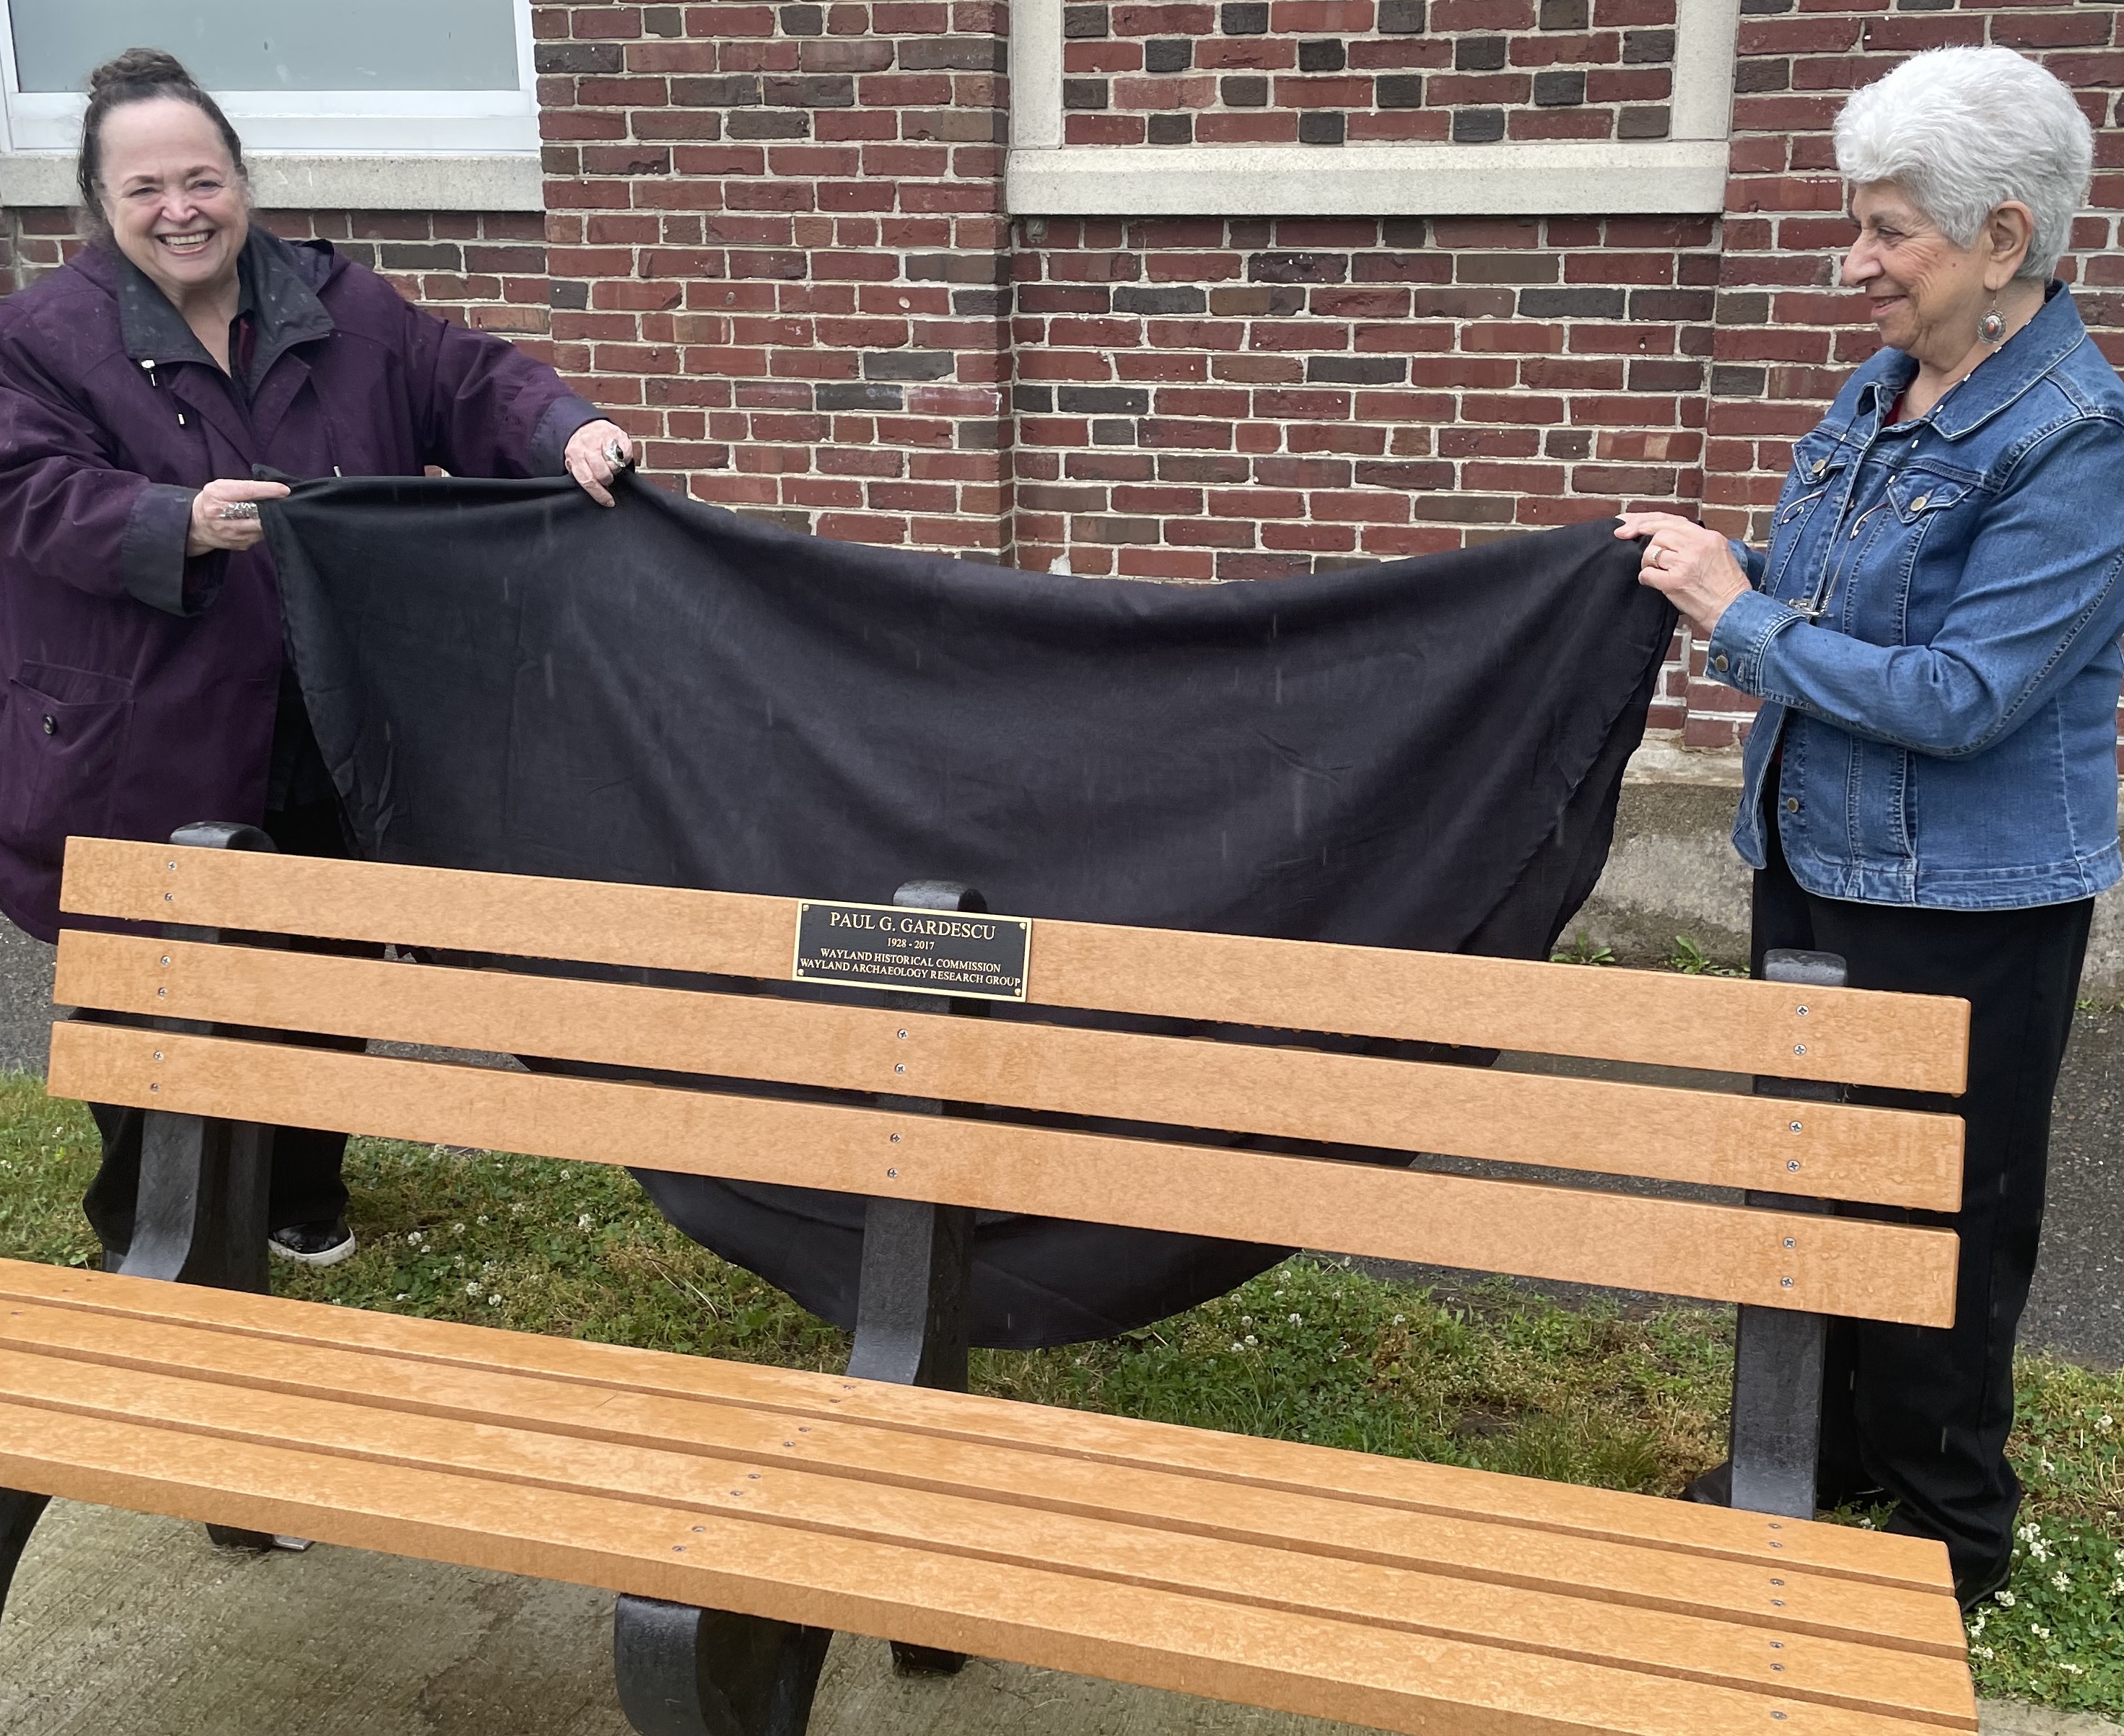 Two women unveiling a bench with a memorial plaque